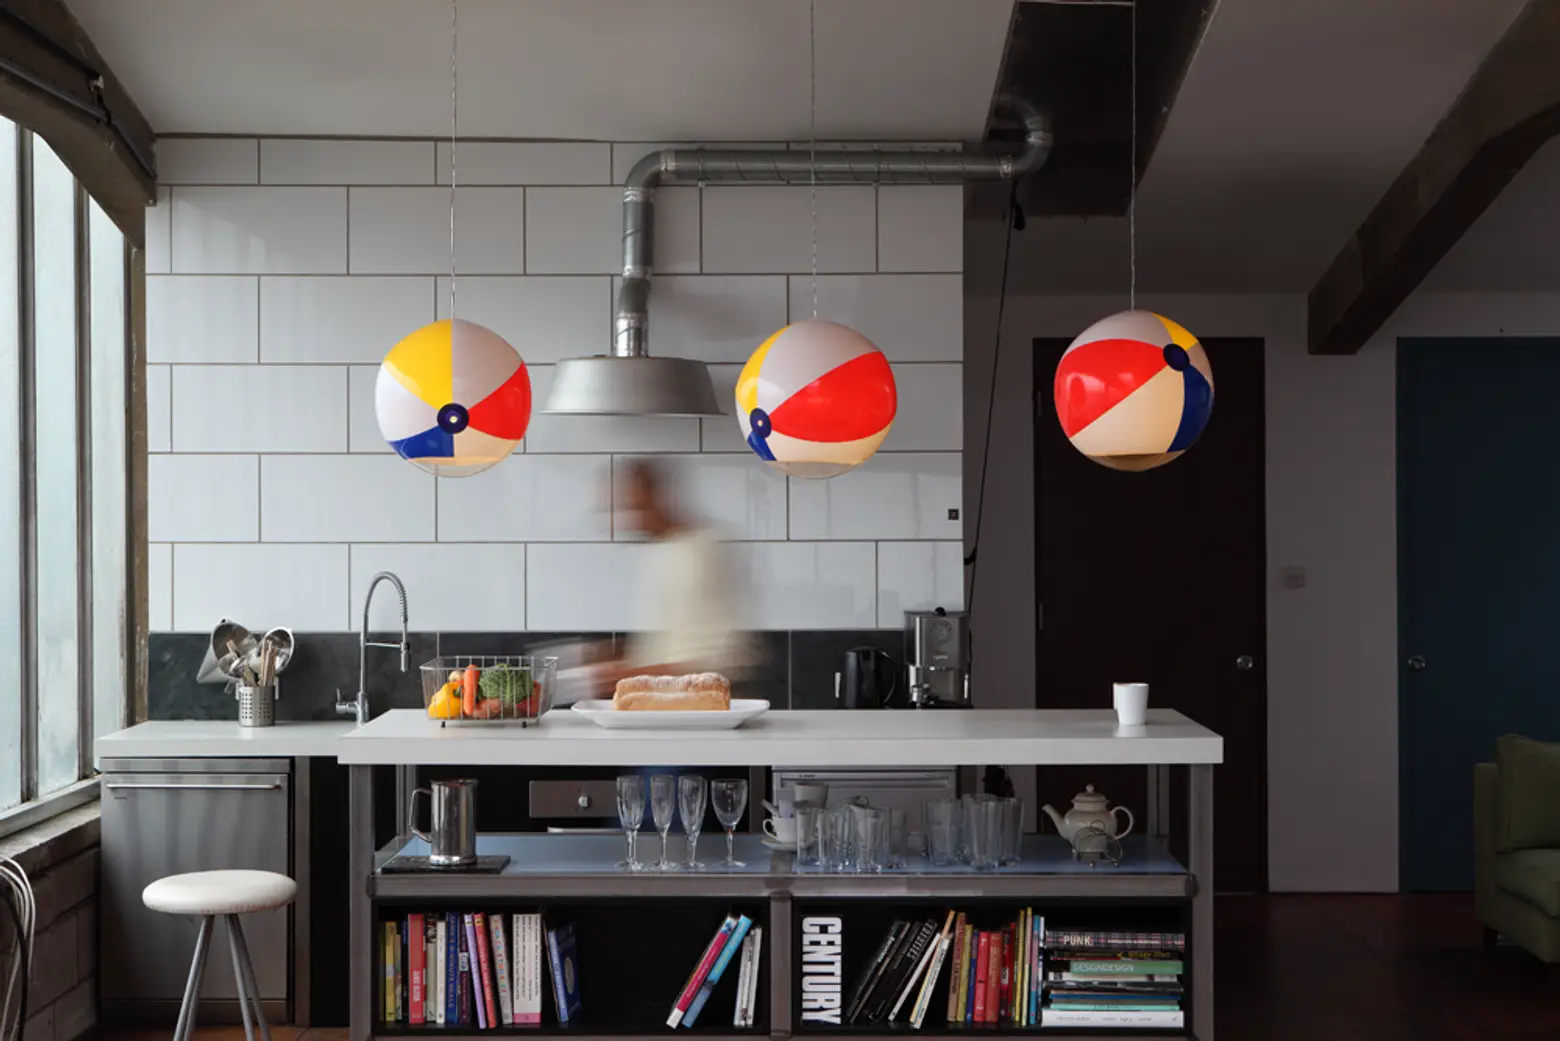 Beach Ball Lights designed by TOBYhouse and Toby Sanders